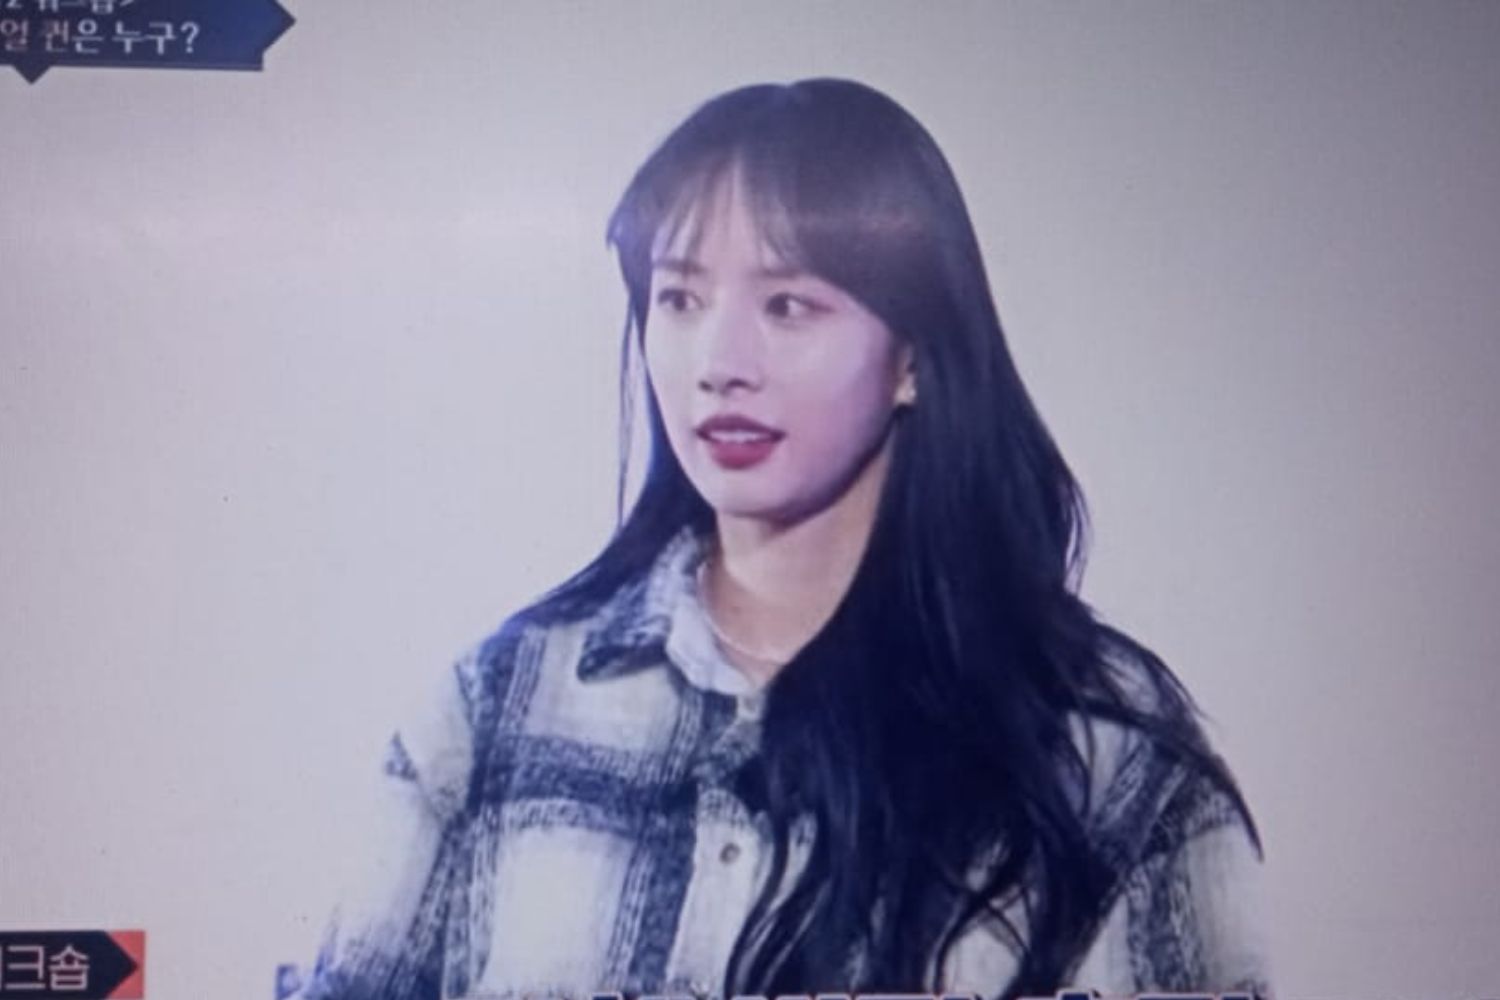 SeolA after winning the title of 'Visual Queen'